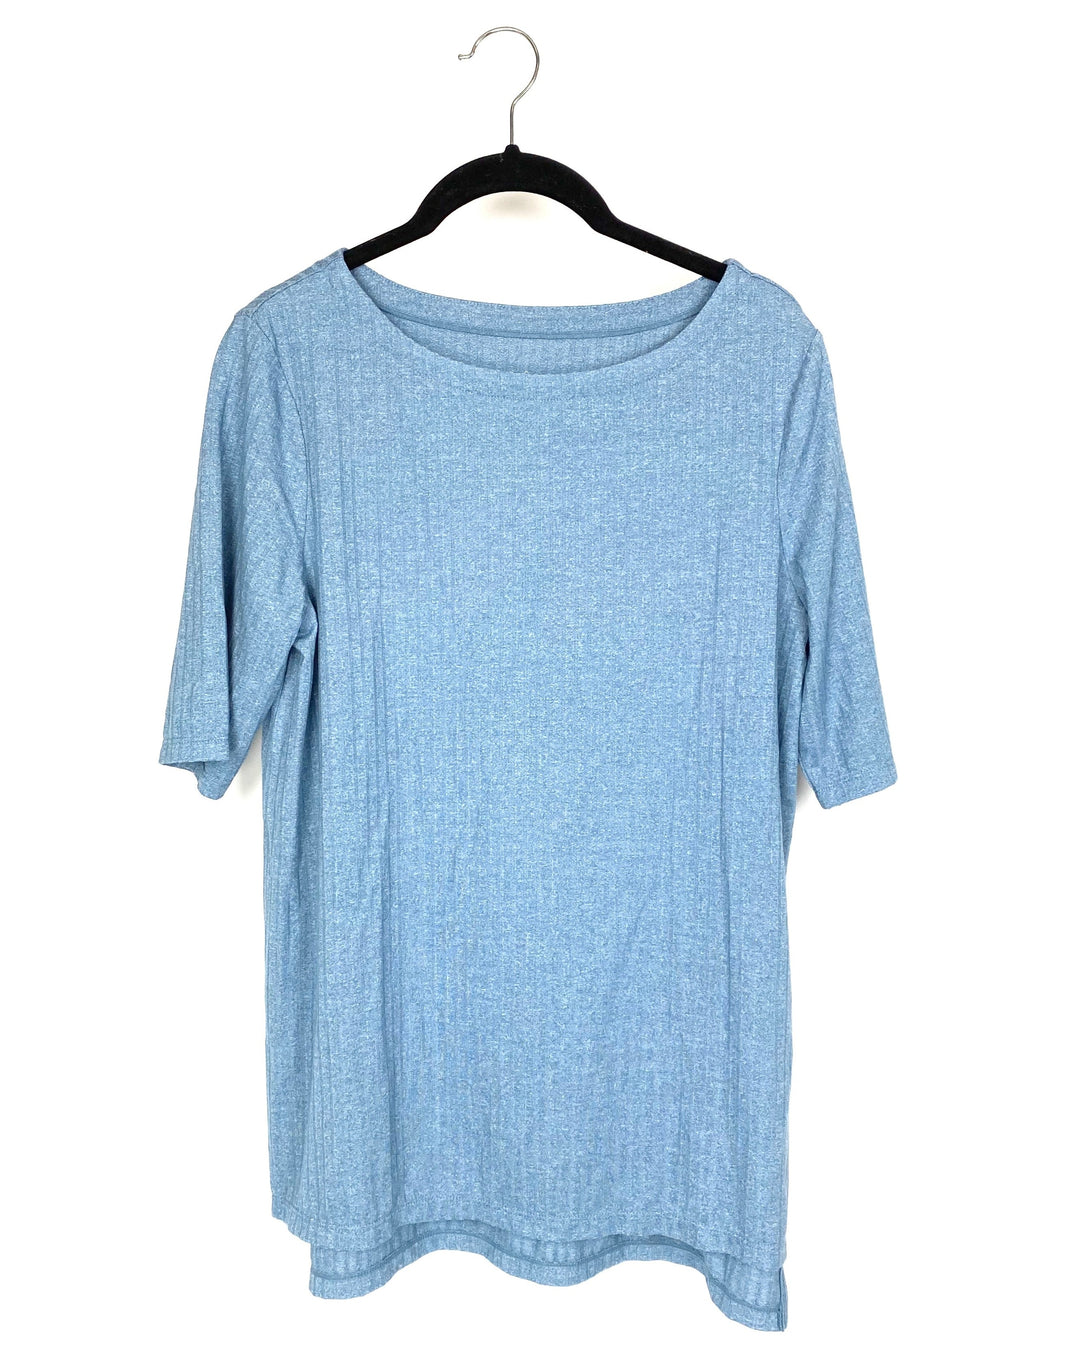 Blue Ribbed Top - Size 6/8